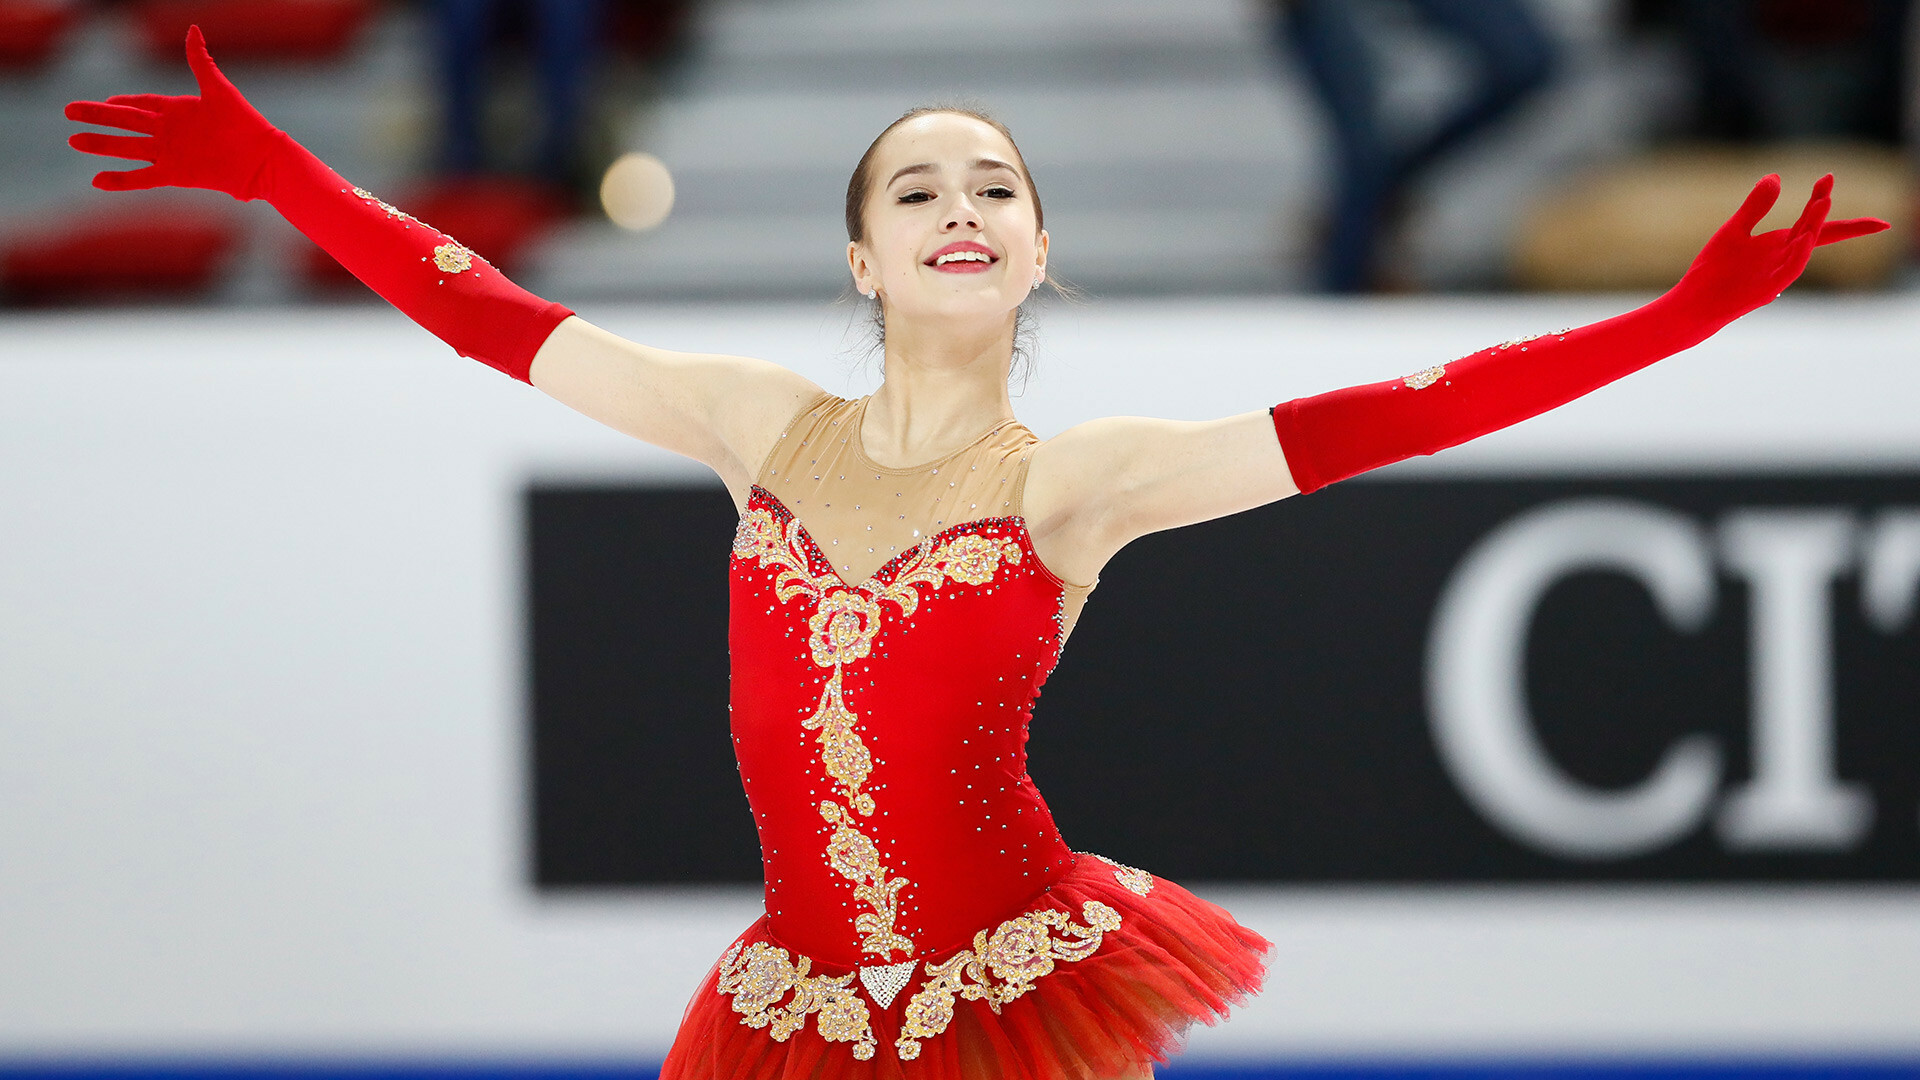 Alina Zagitova: She won the gold with a total of 238.43 points, at the 2018 CS Nebelhorn Trophy in Oberstdorf. 1920x1080 Full HD Wallpaper.